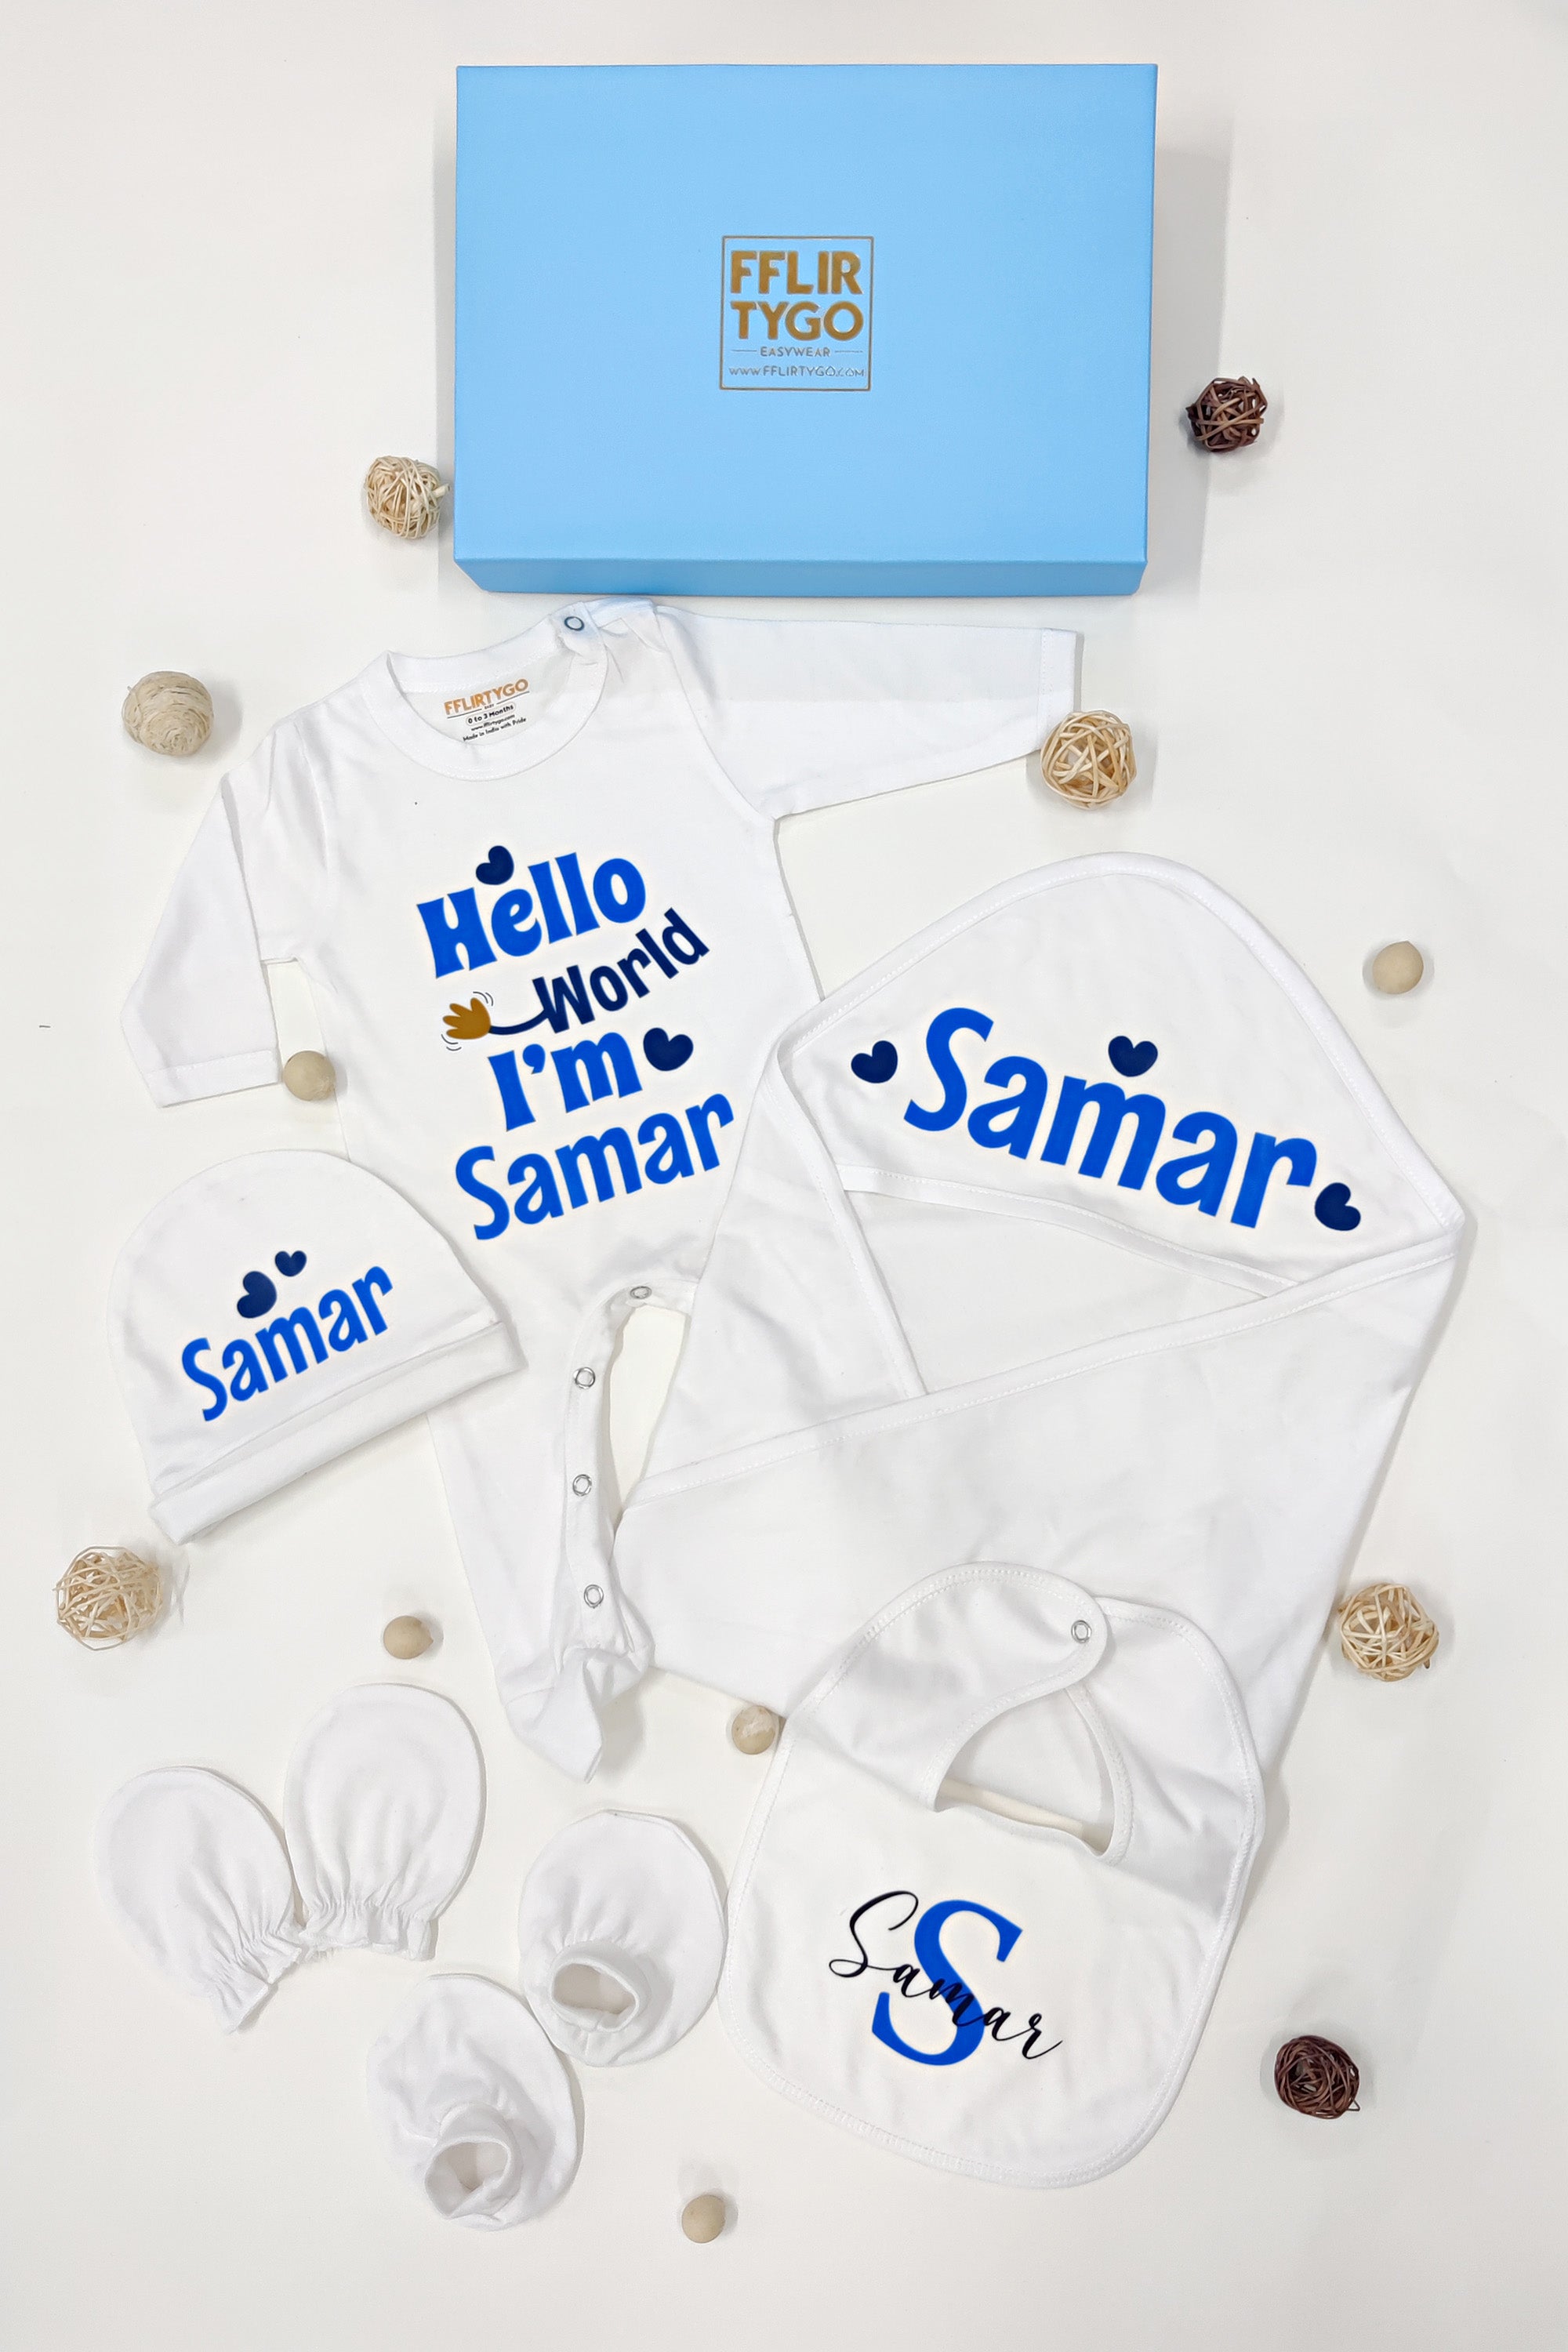 Handmade & Personalised New Baby Gifts - A Gift of Happiness